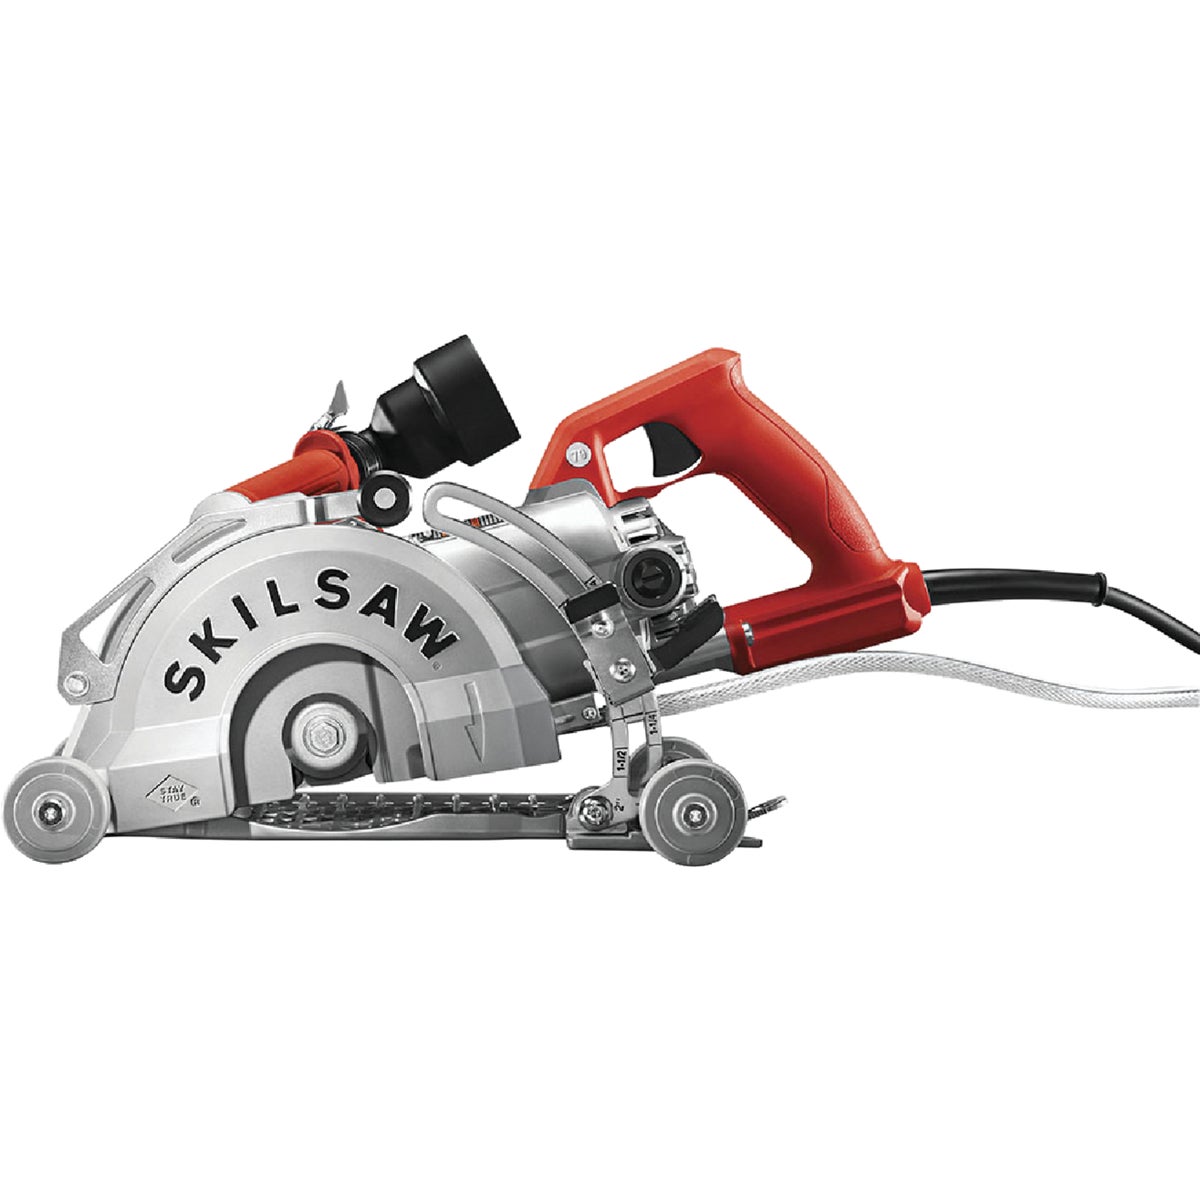 SKILSAW Medusaw 7 In. 15-Amp Worm Drive Circular Saw for Concrete